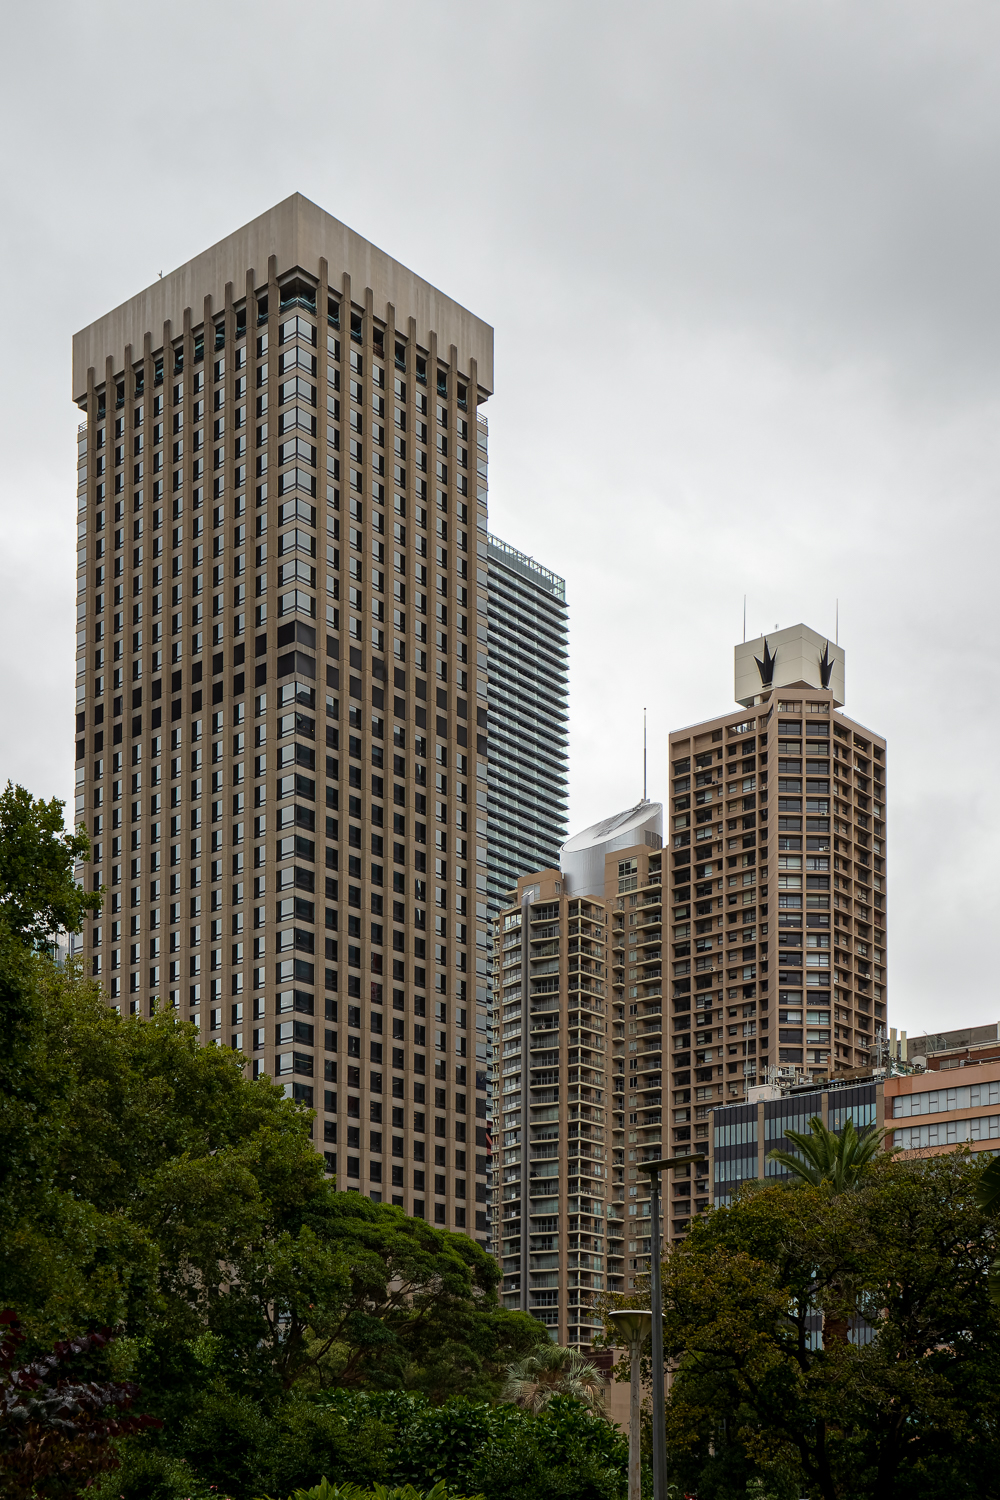 A tall concrete building surrounded by other tall buildings